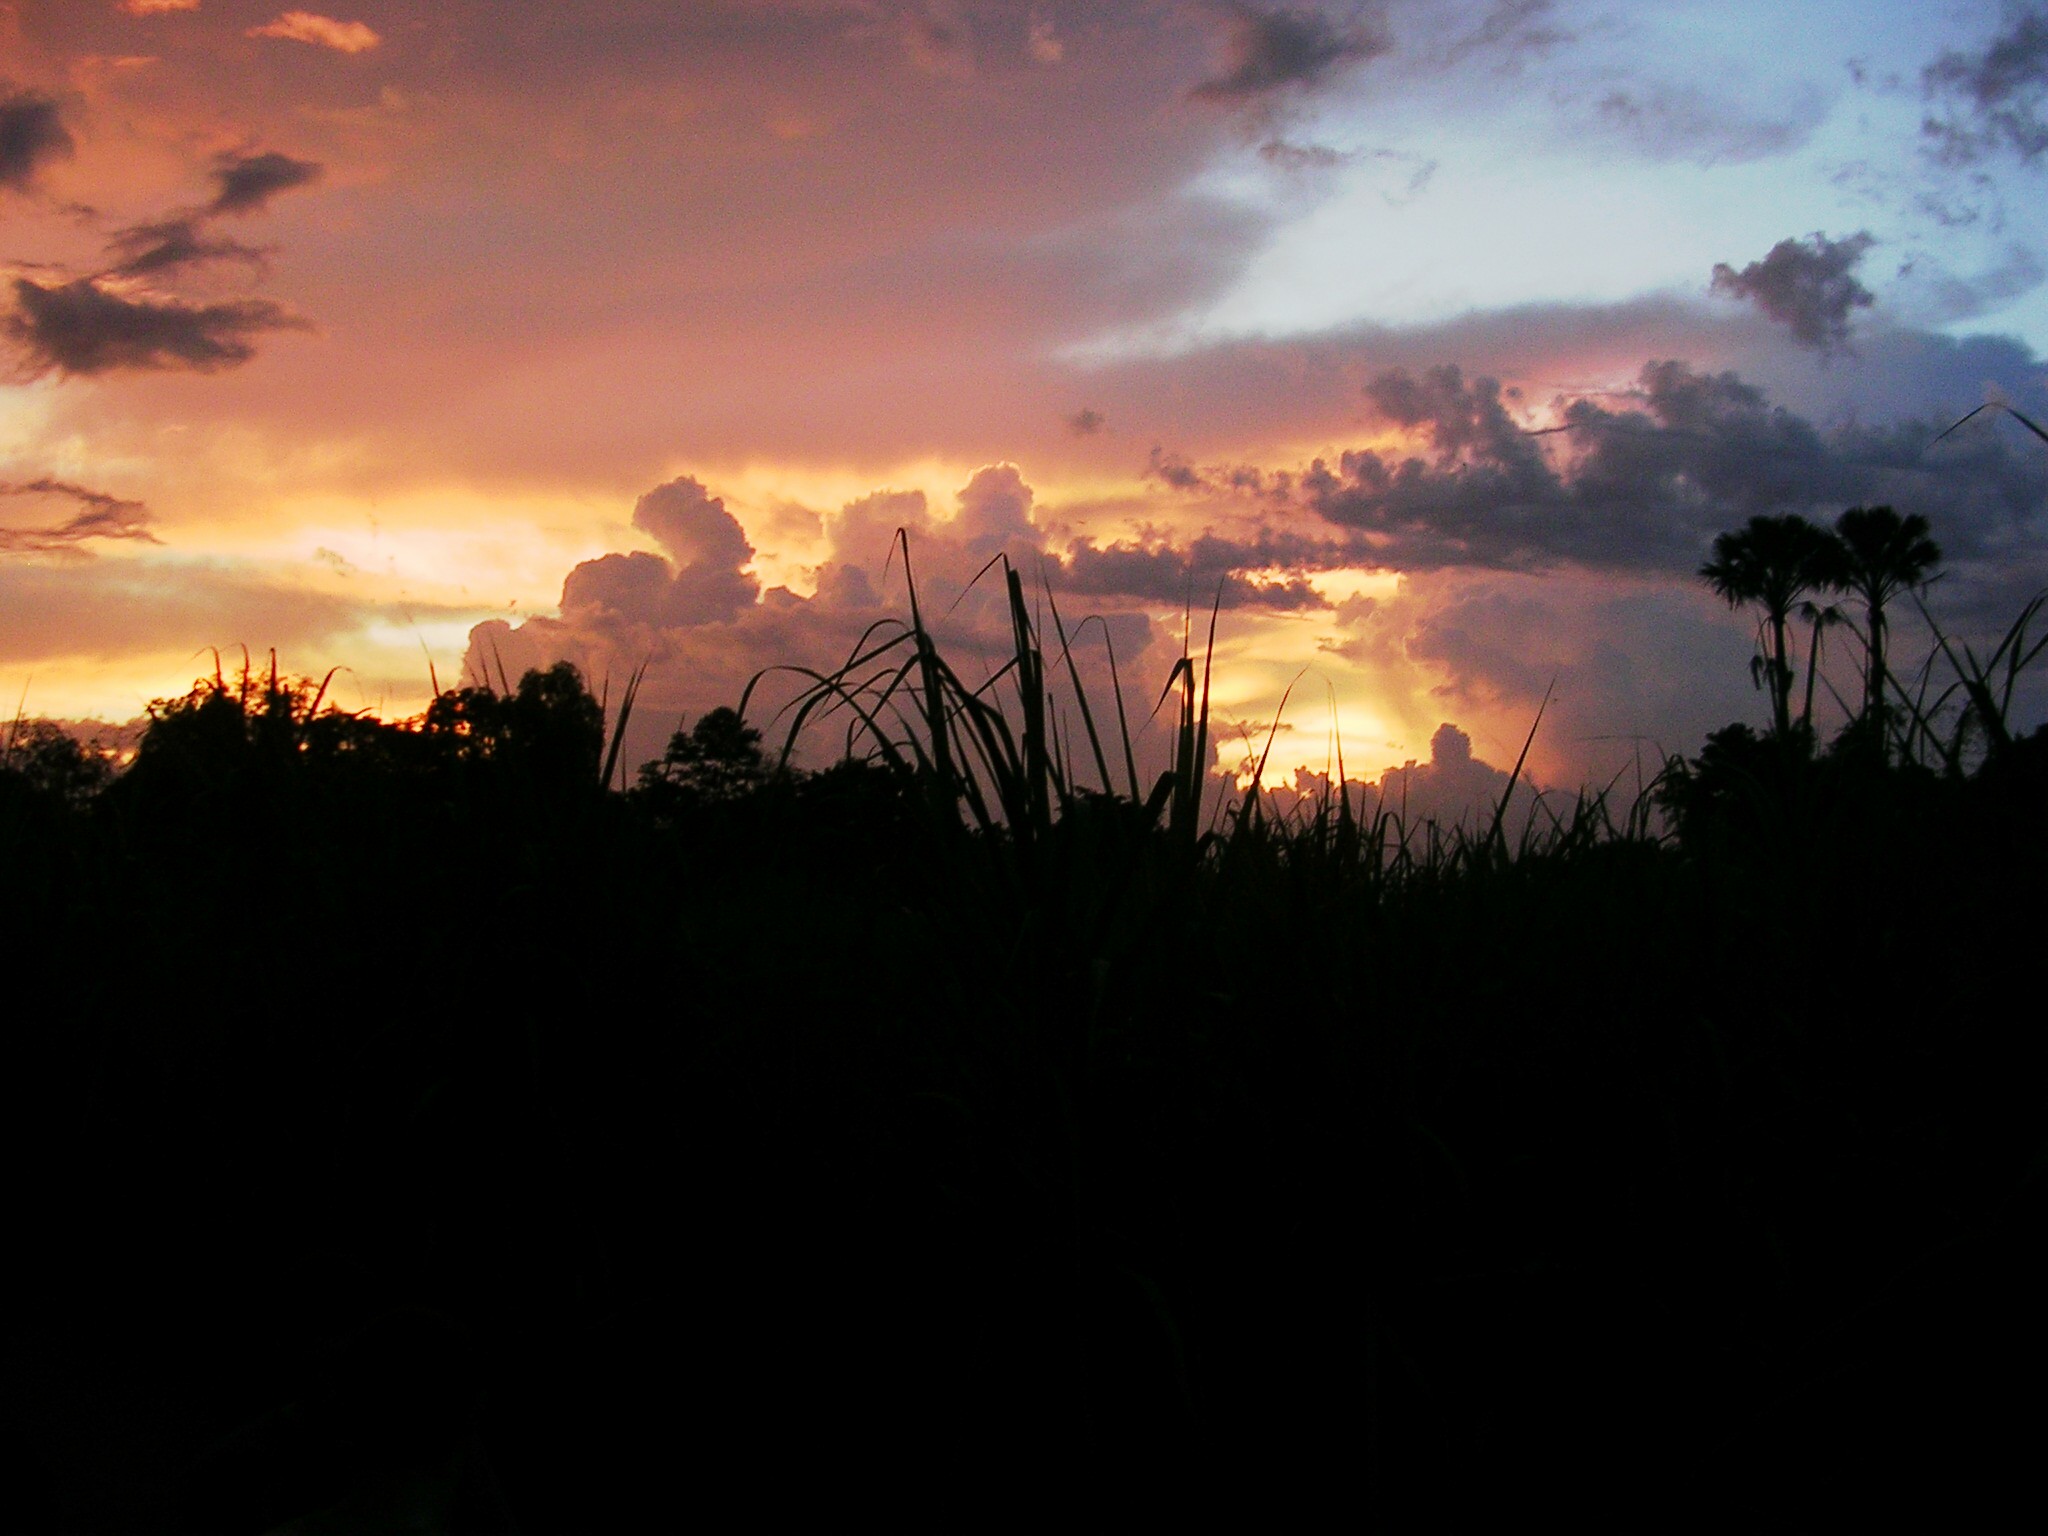 Sky at dusk over the suger cane feilds in Negros